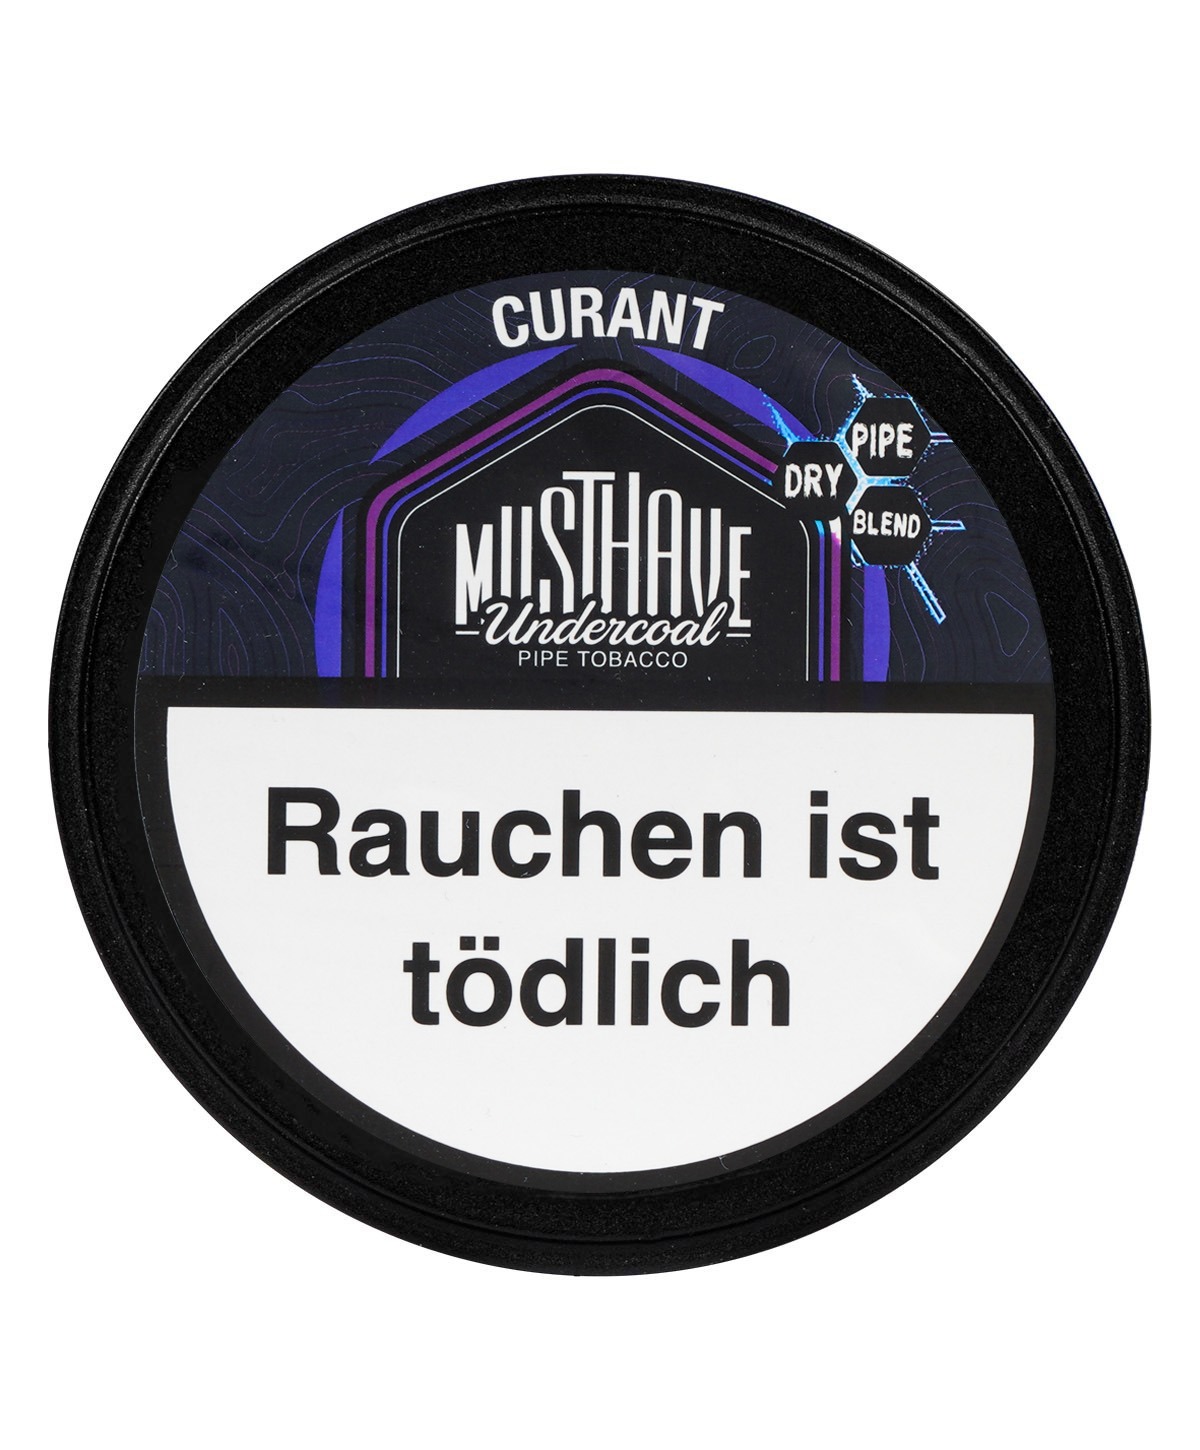 Musthave Curant Dry Base 70g